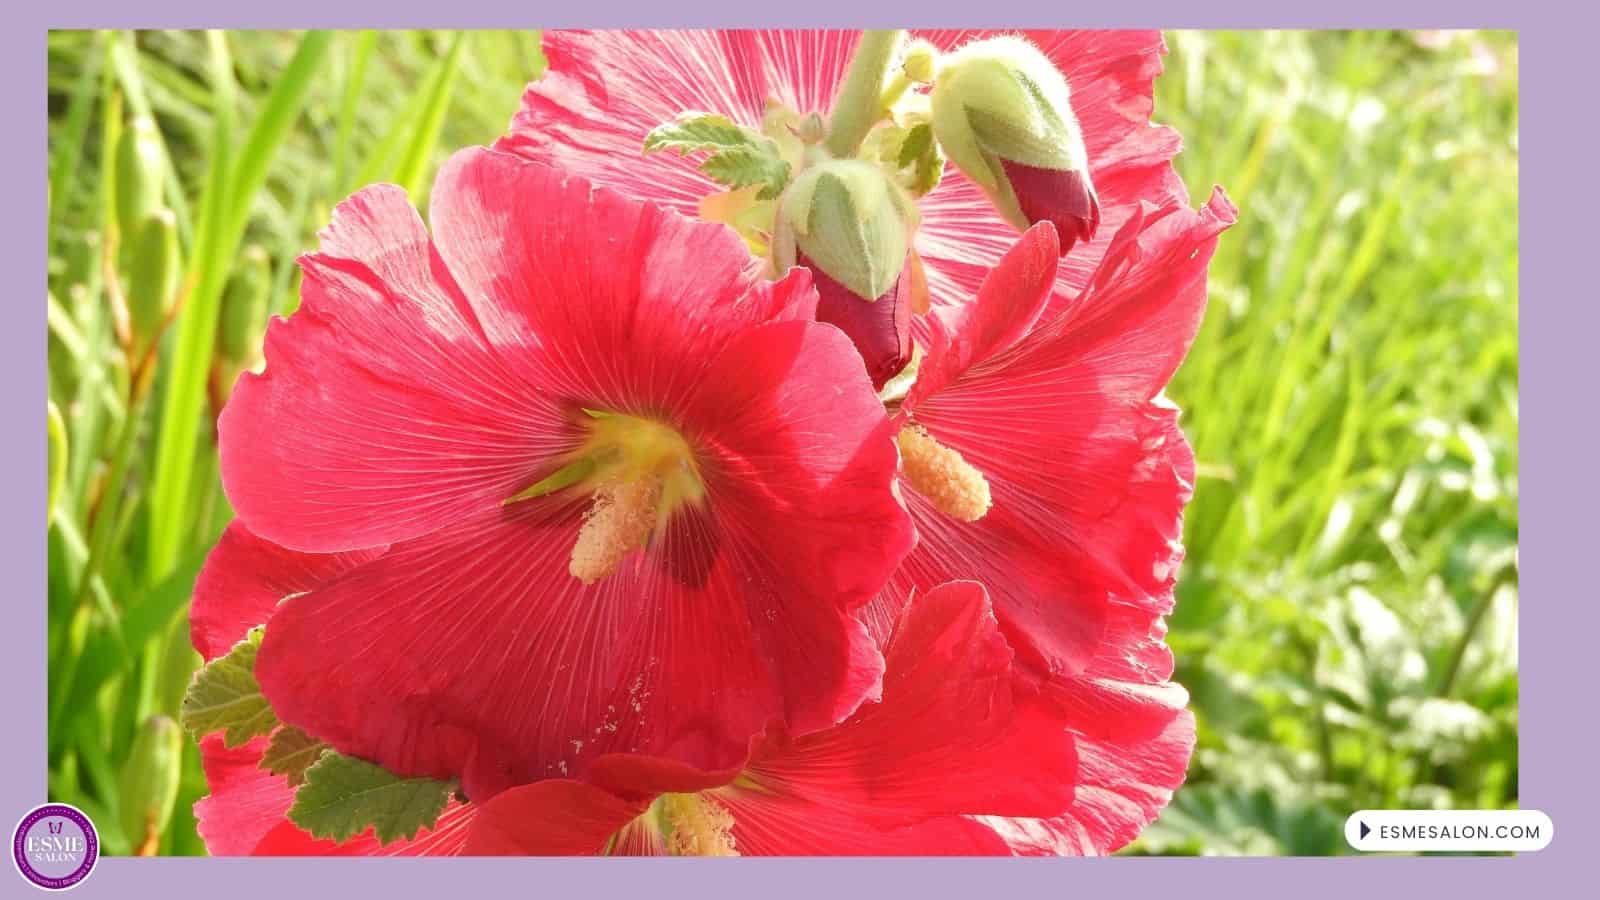 An image of Hollyhock flowers